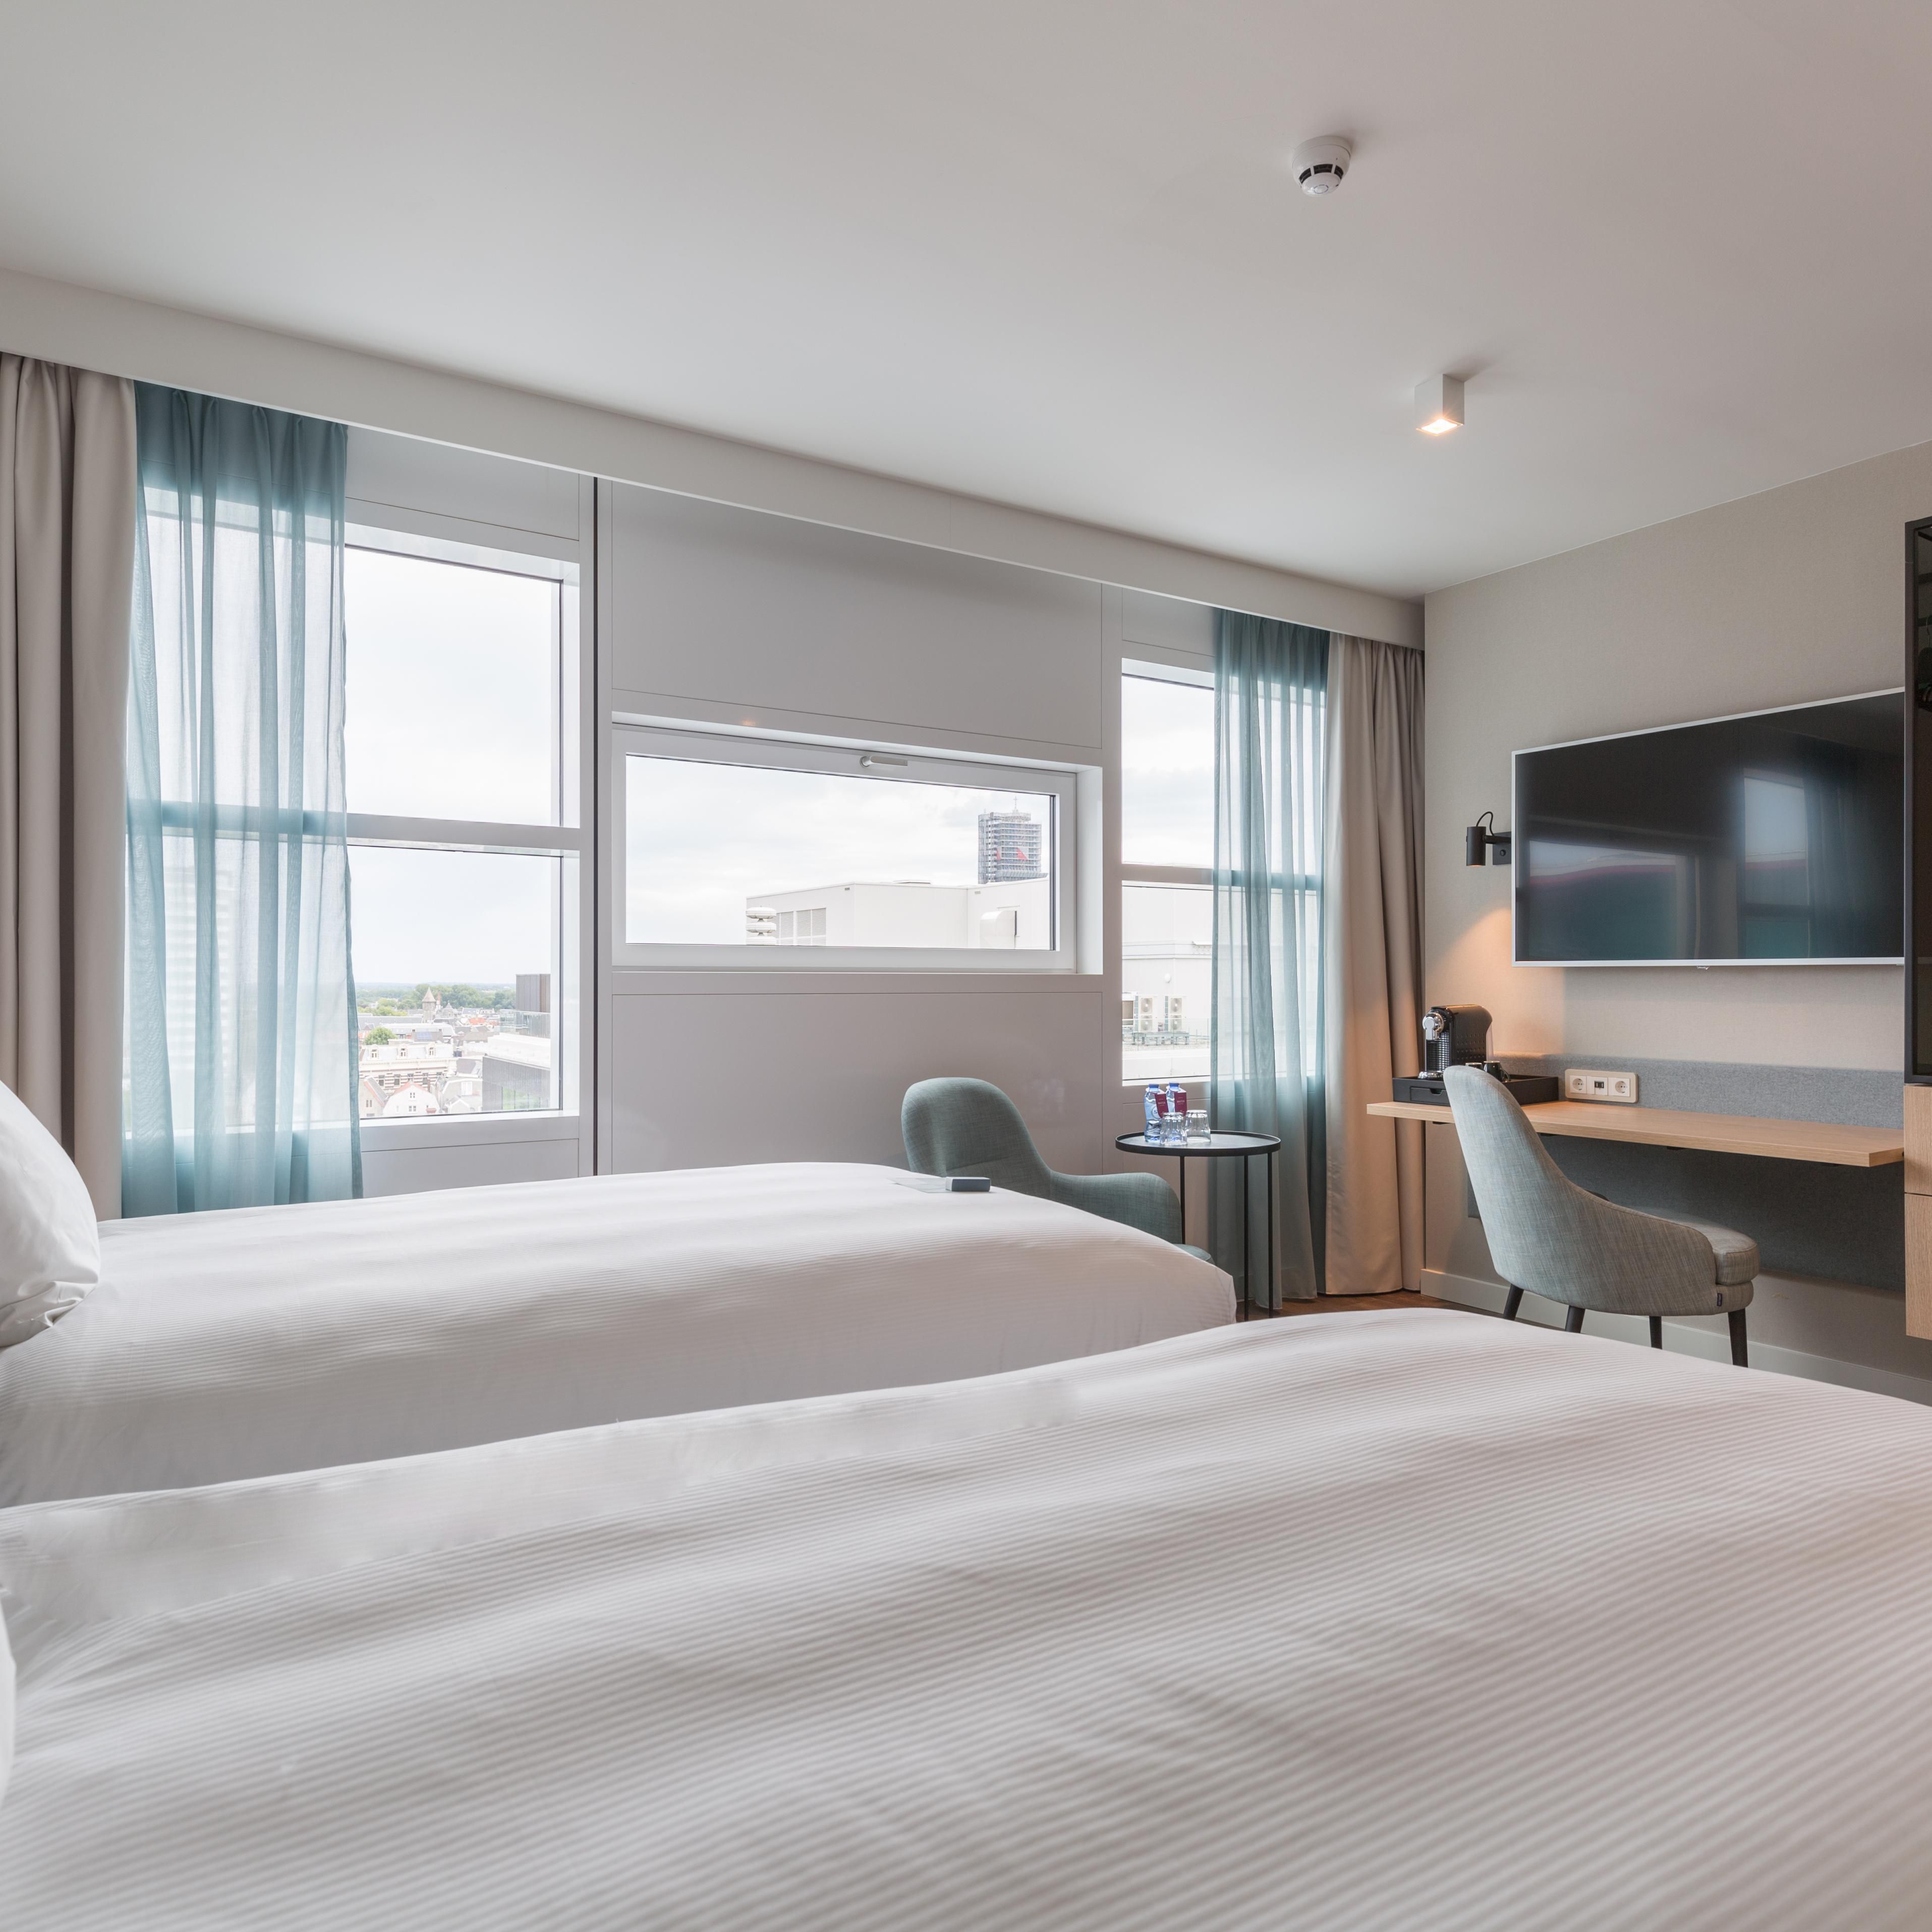 Leisure or business our rooms are perfectly designed for you